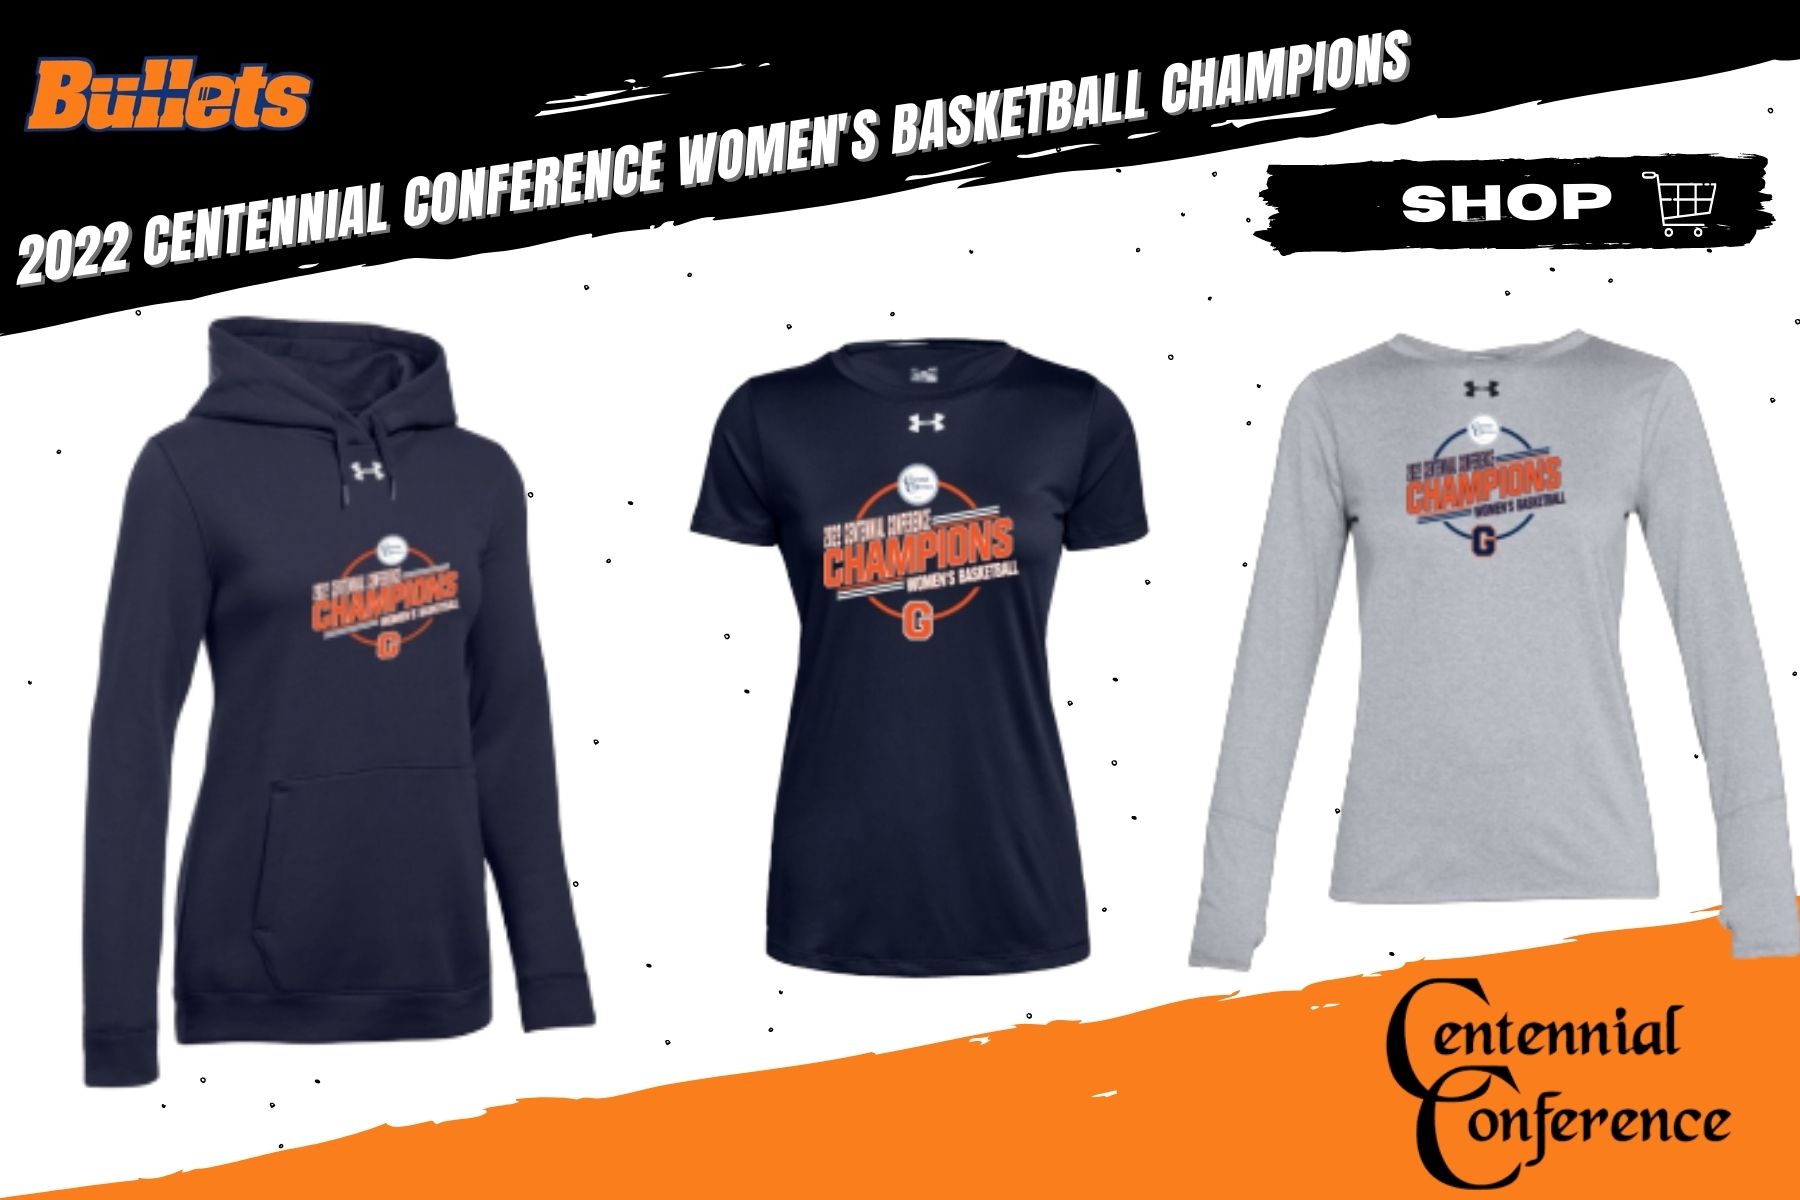 2022 Women's Basketball Championship Apparel Now Available